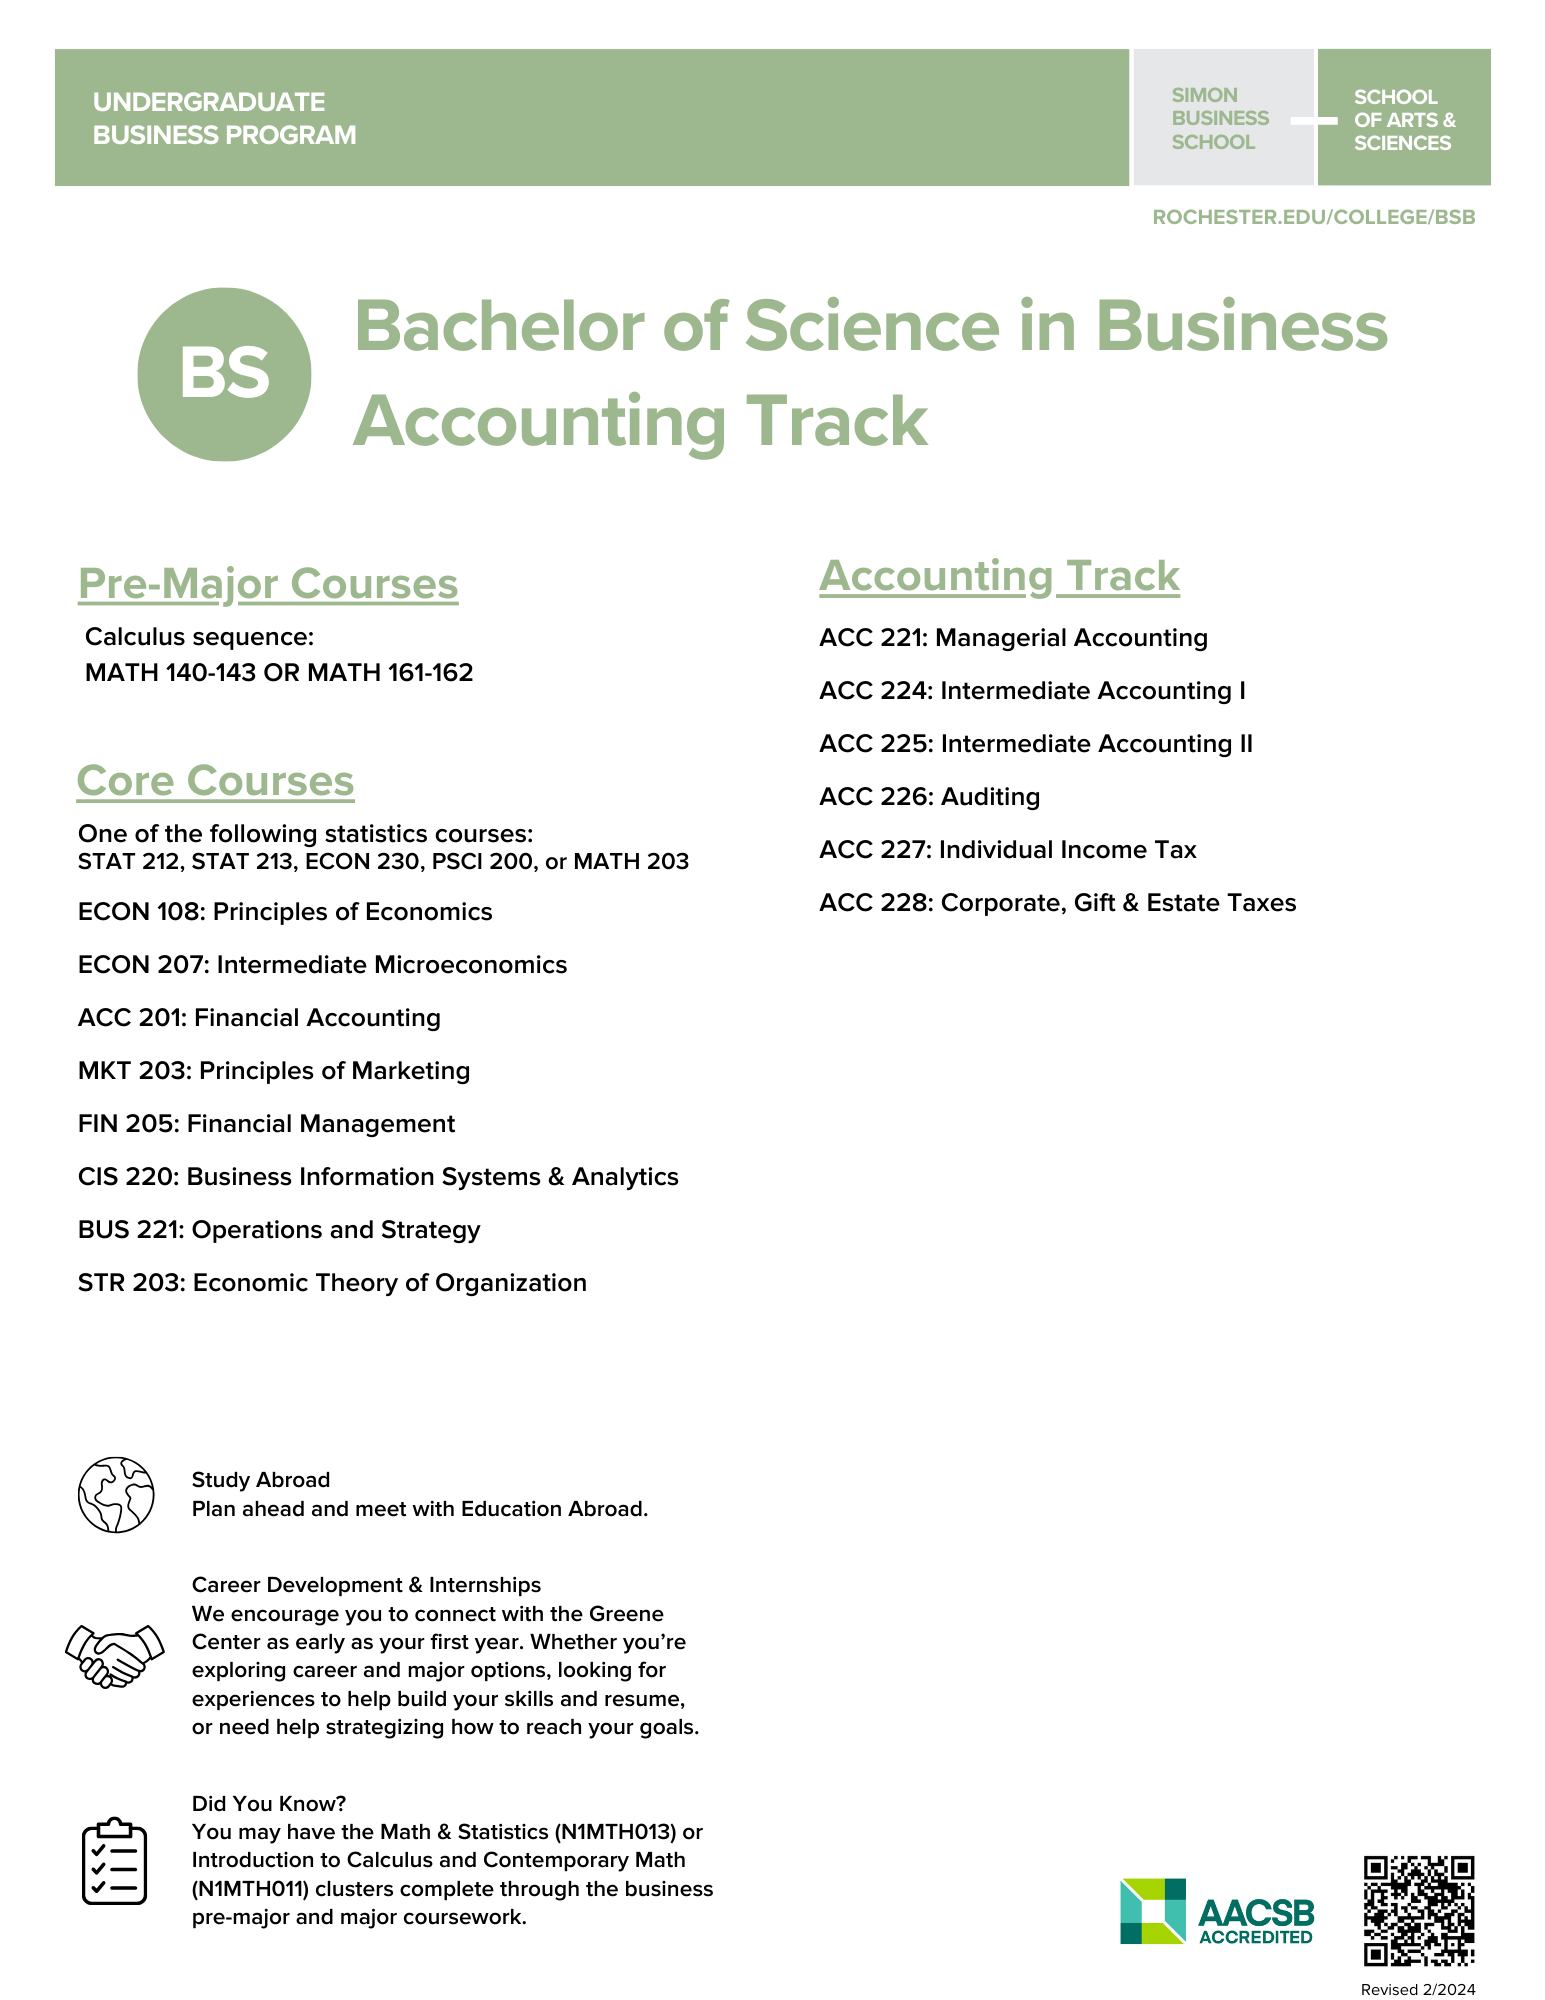 BS business accounting track overview and course requirements flyer.